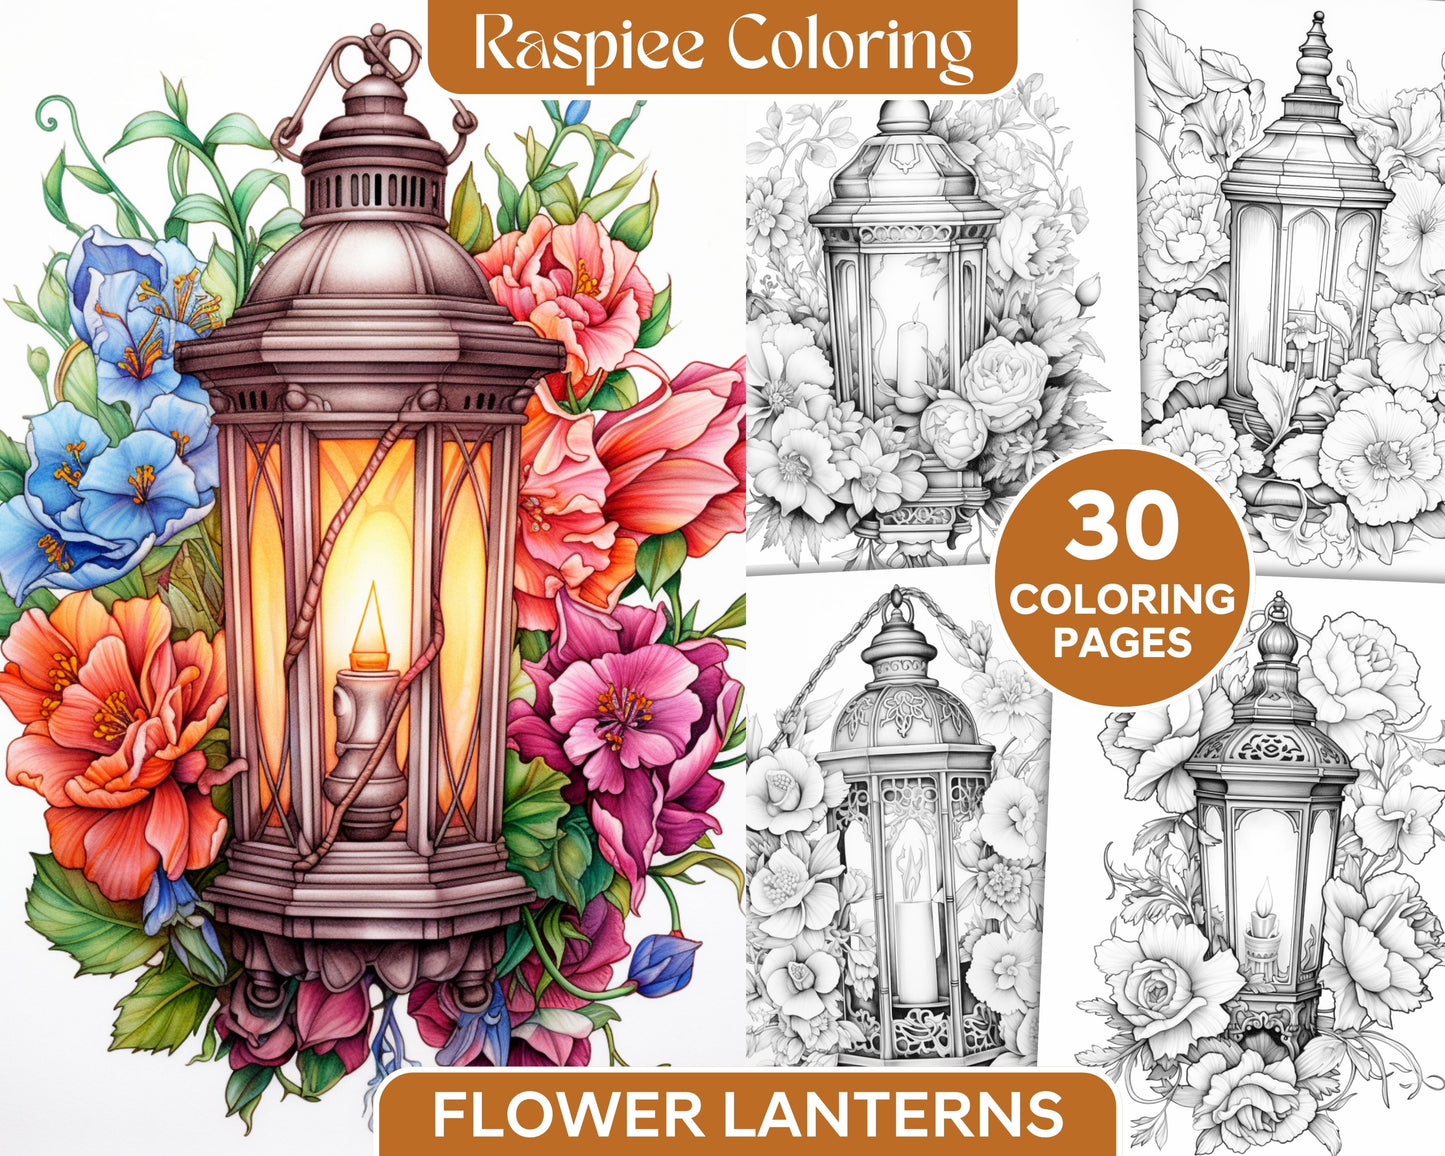 Vintage Lantern Flower Grayscale Coloring Page Printable for Adults, Sample Image, Flower Grayscale Coloring Page, Digital Download for Relaxation and Stress Relief, Printable Vintage Lantern Coloring Page